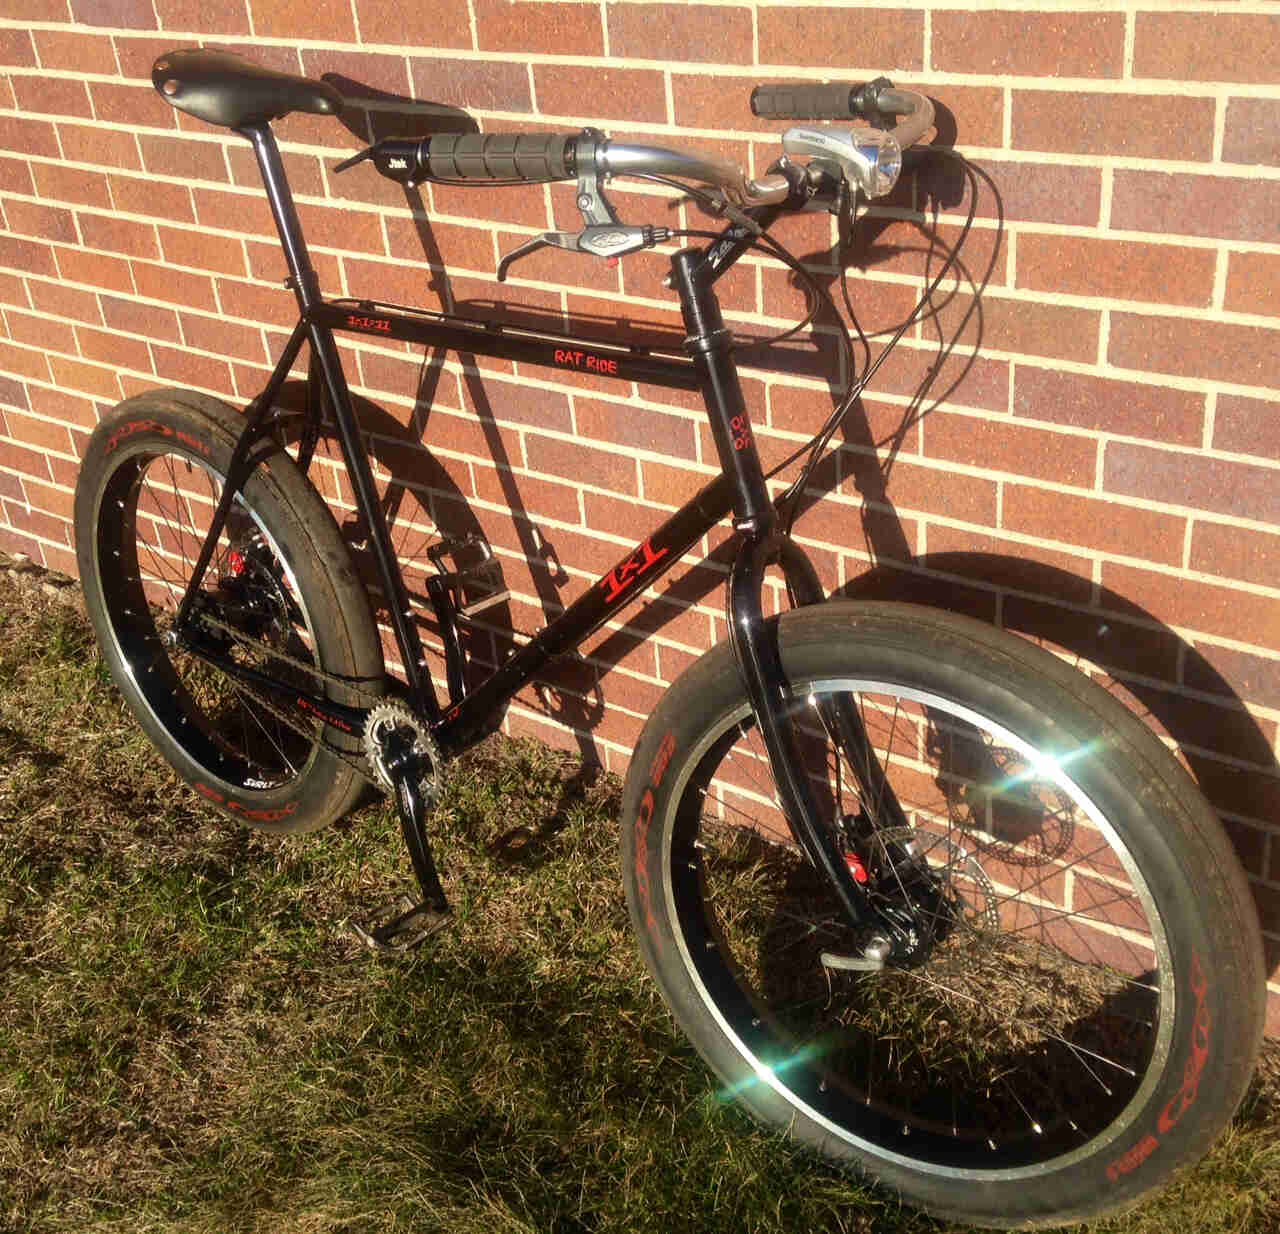 Right side view of a black Surly 1x1 Rat Race bike, on grass, leaning against a brick wall